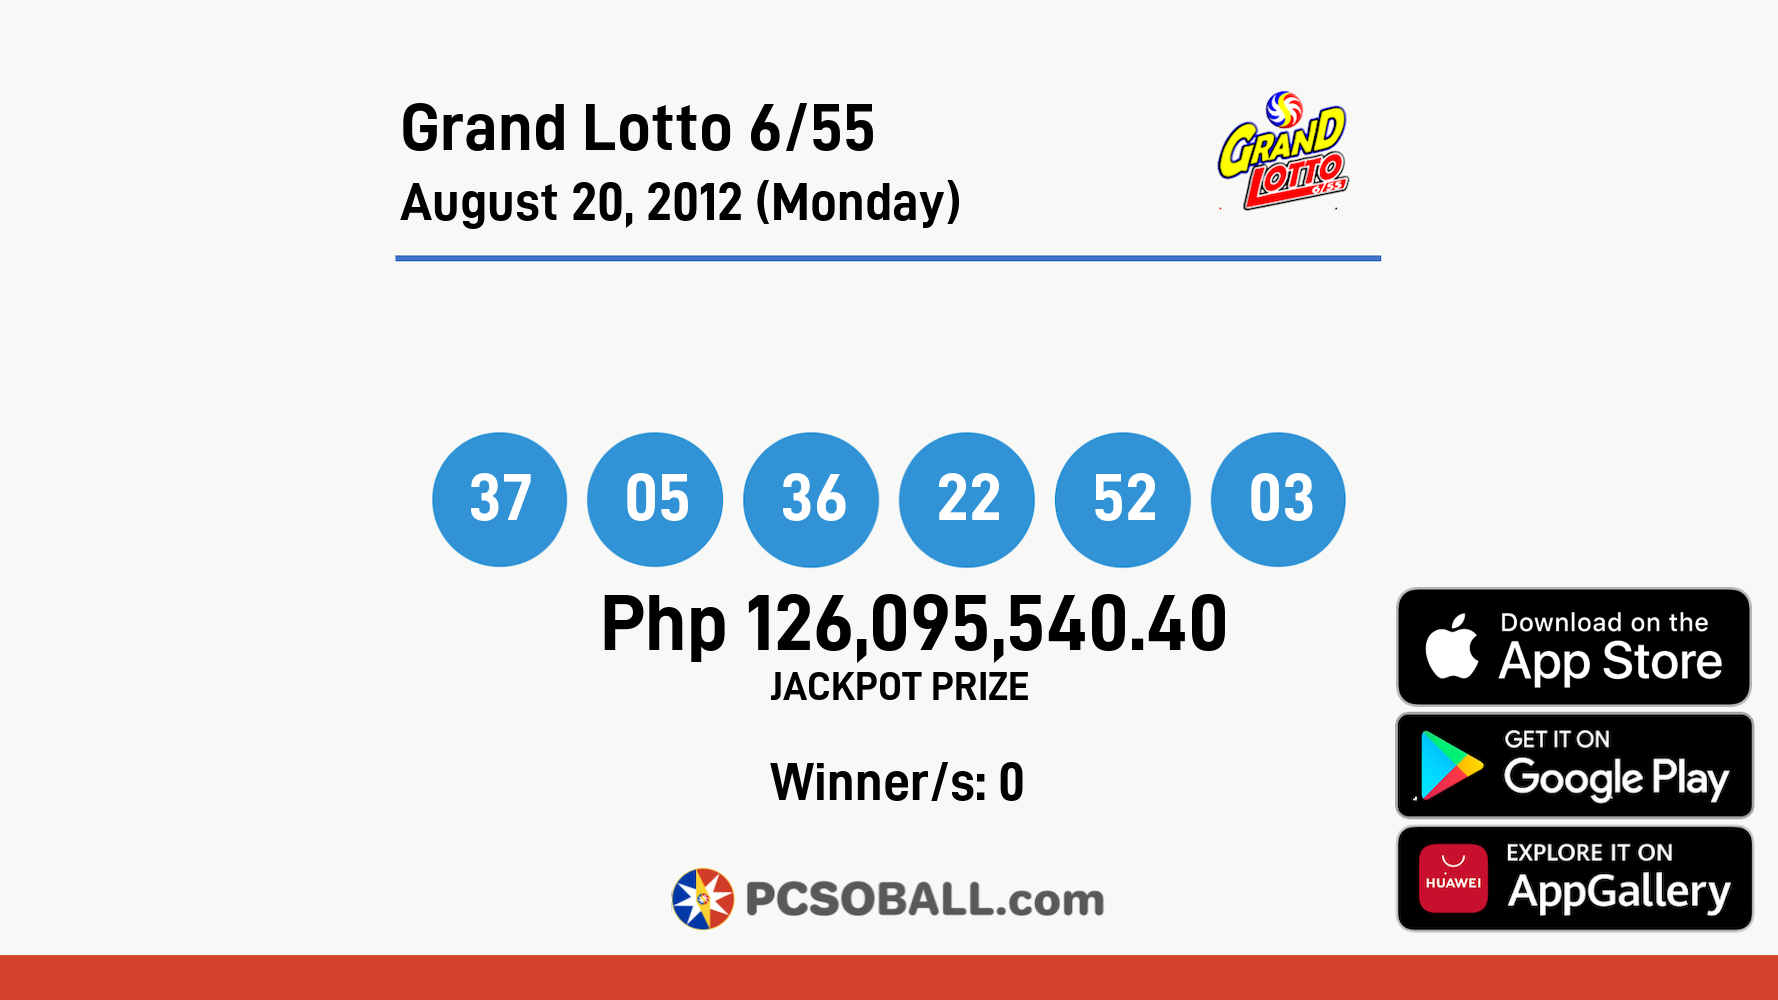 Grand Lotto 6/55 August 20, 2012 (Monday) Result